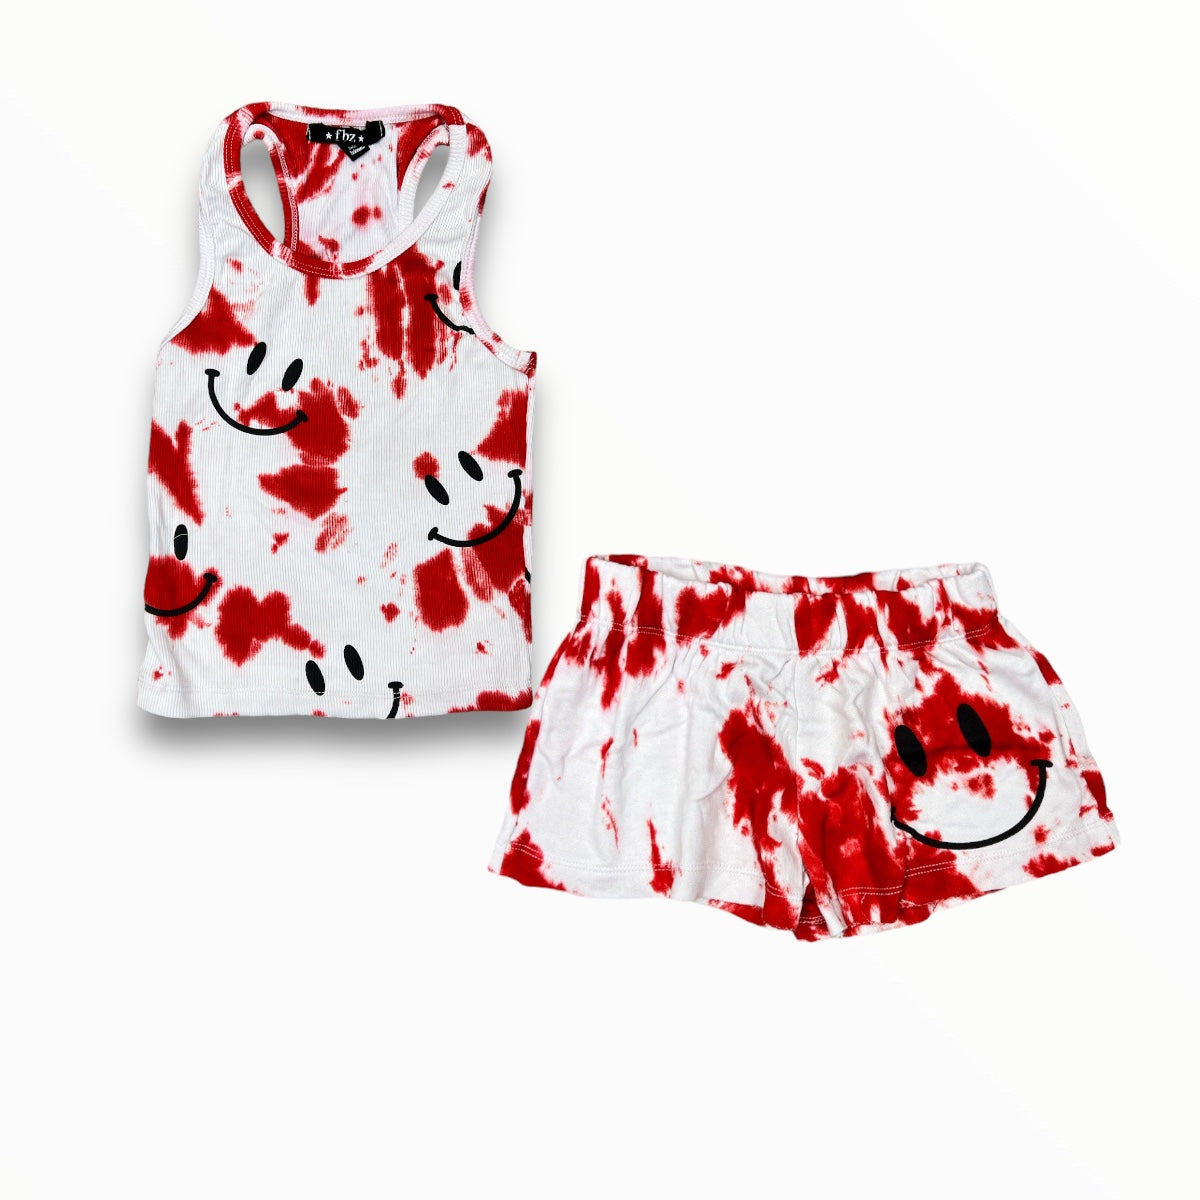 FLOWERS BY ZOE GYM SHORT - RED TIE DYE - SMILEY